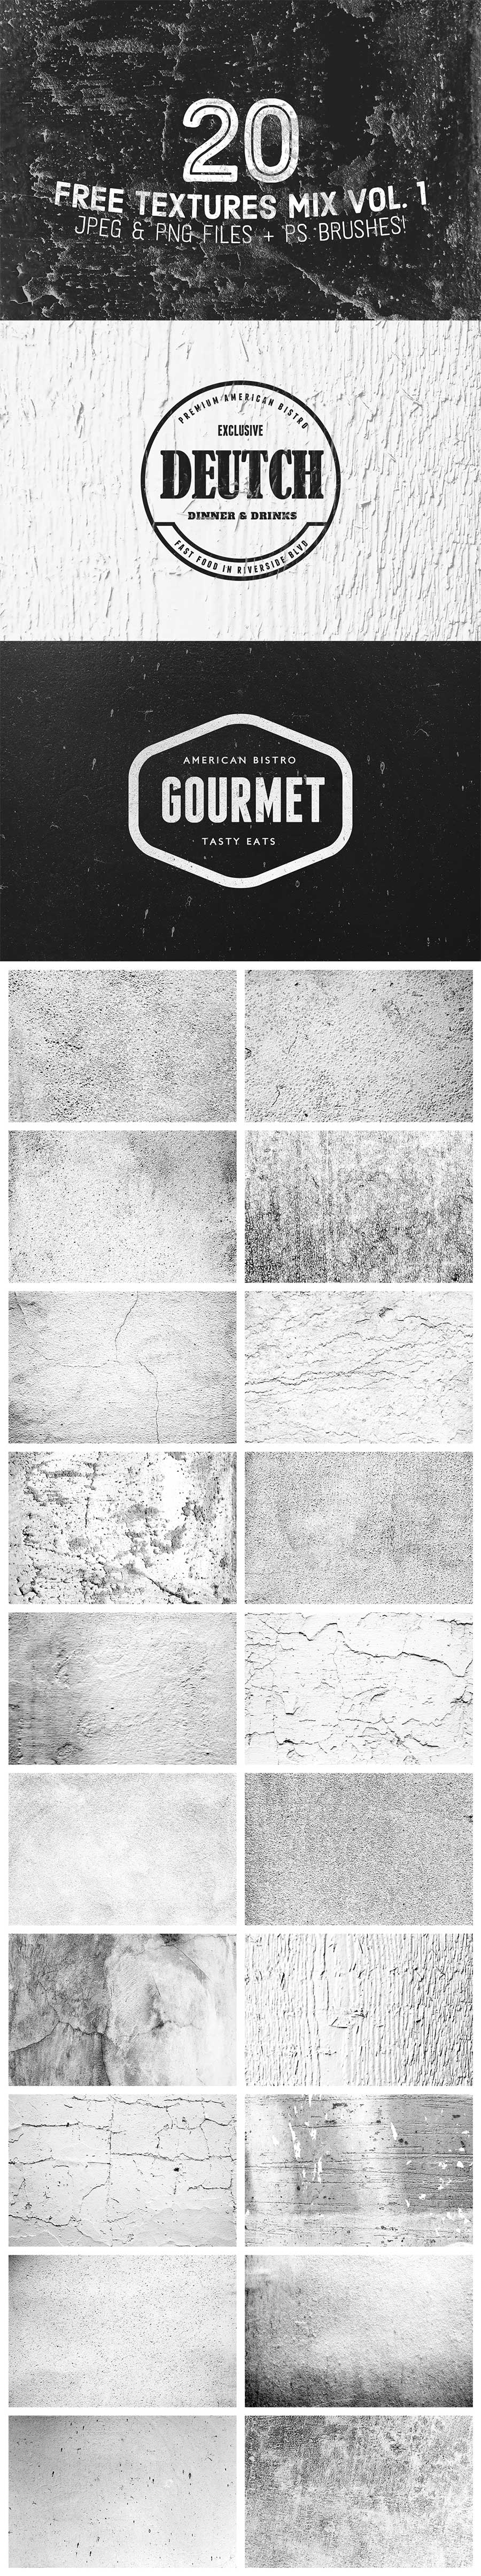 20-Free-Textures-Mix-For-Artists